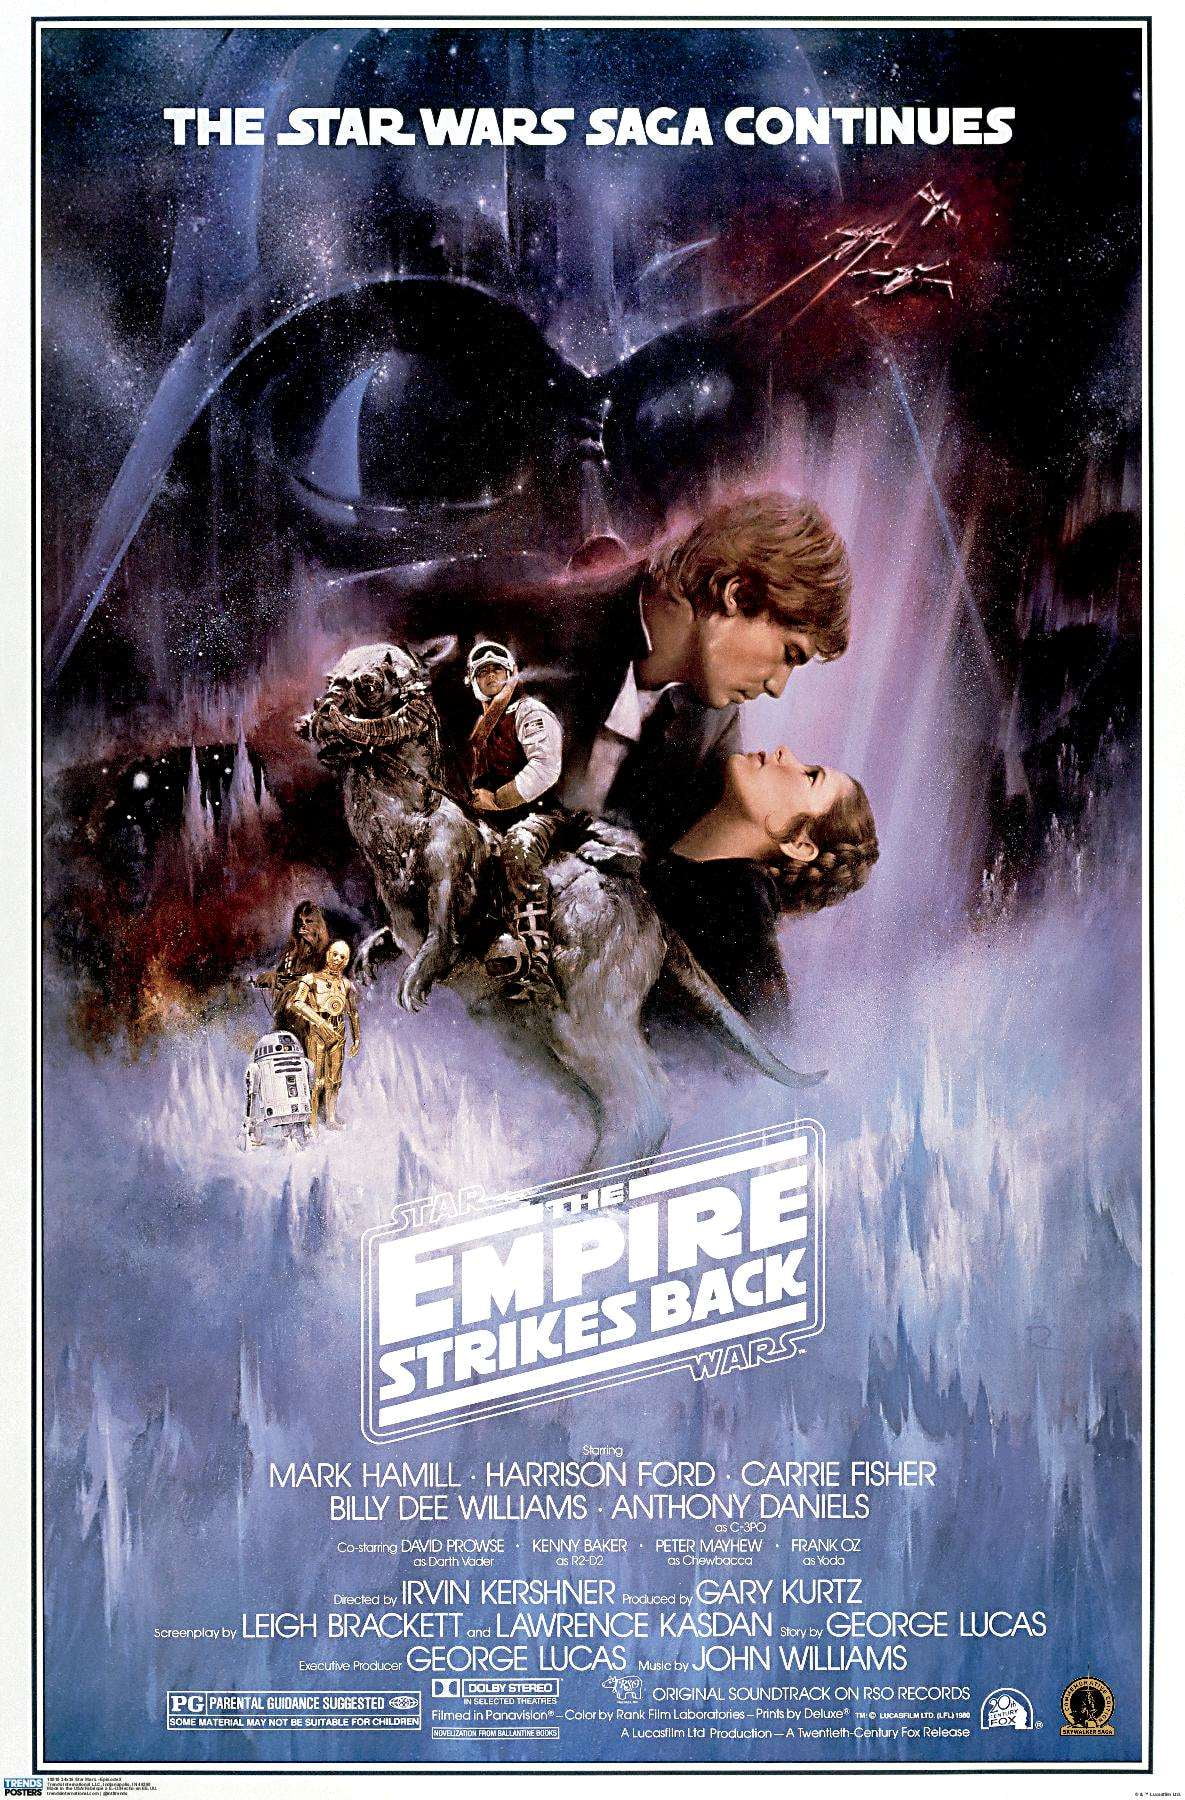 SPECIAL EDITION 24 x 36" Details about   STAR WARS THE EMPIRE STRIKES BACK MOVIE POSTER 